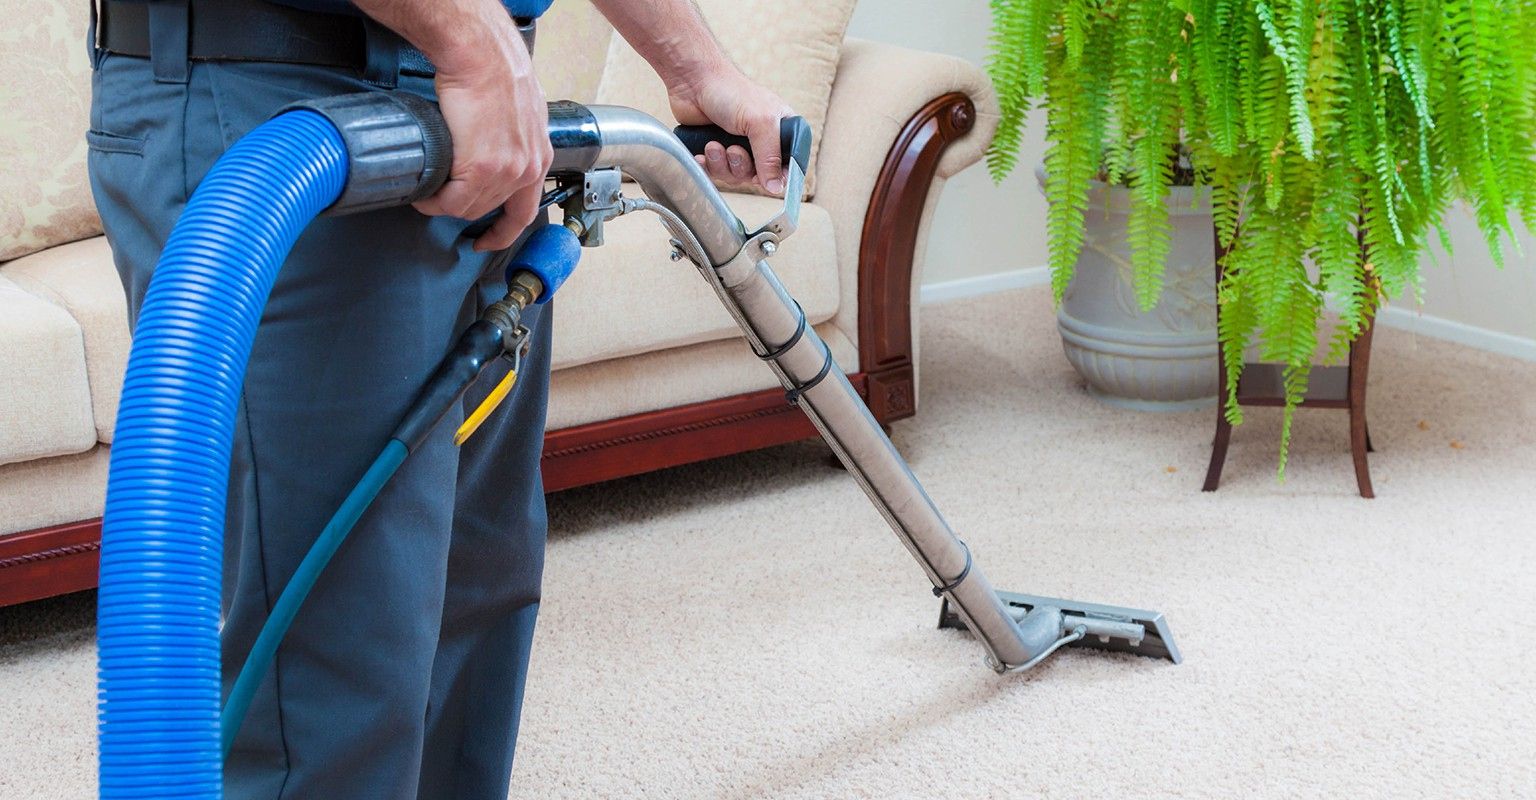 Carpet Cleaning Companies Near Me Benefits -